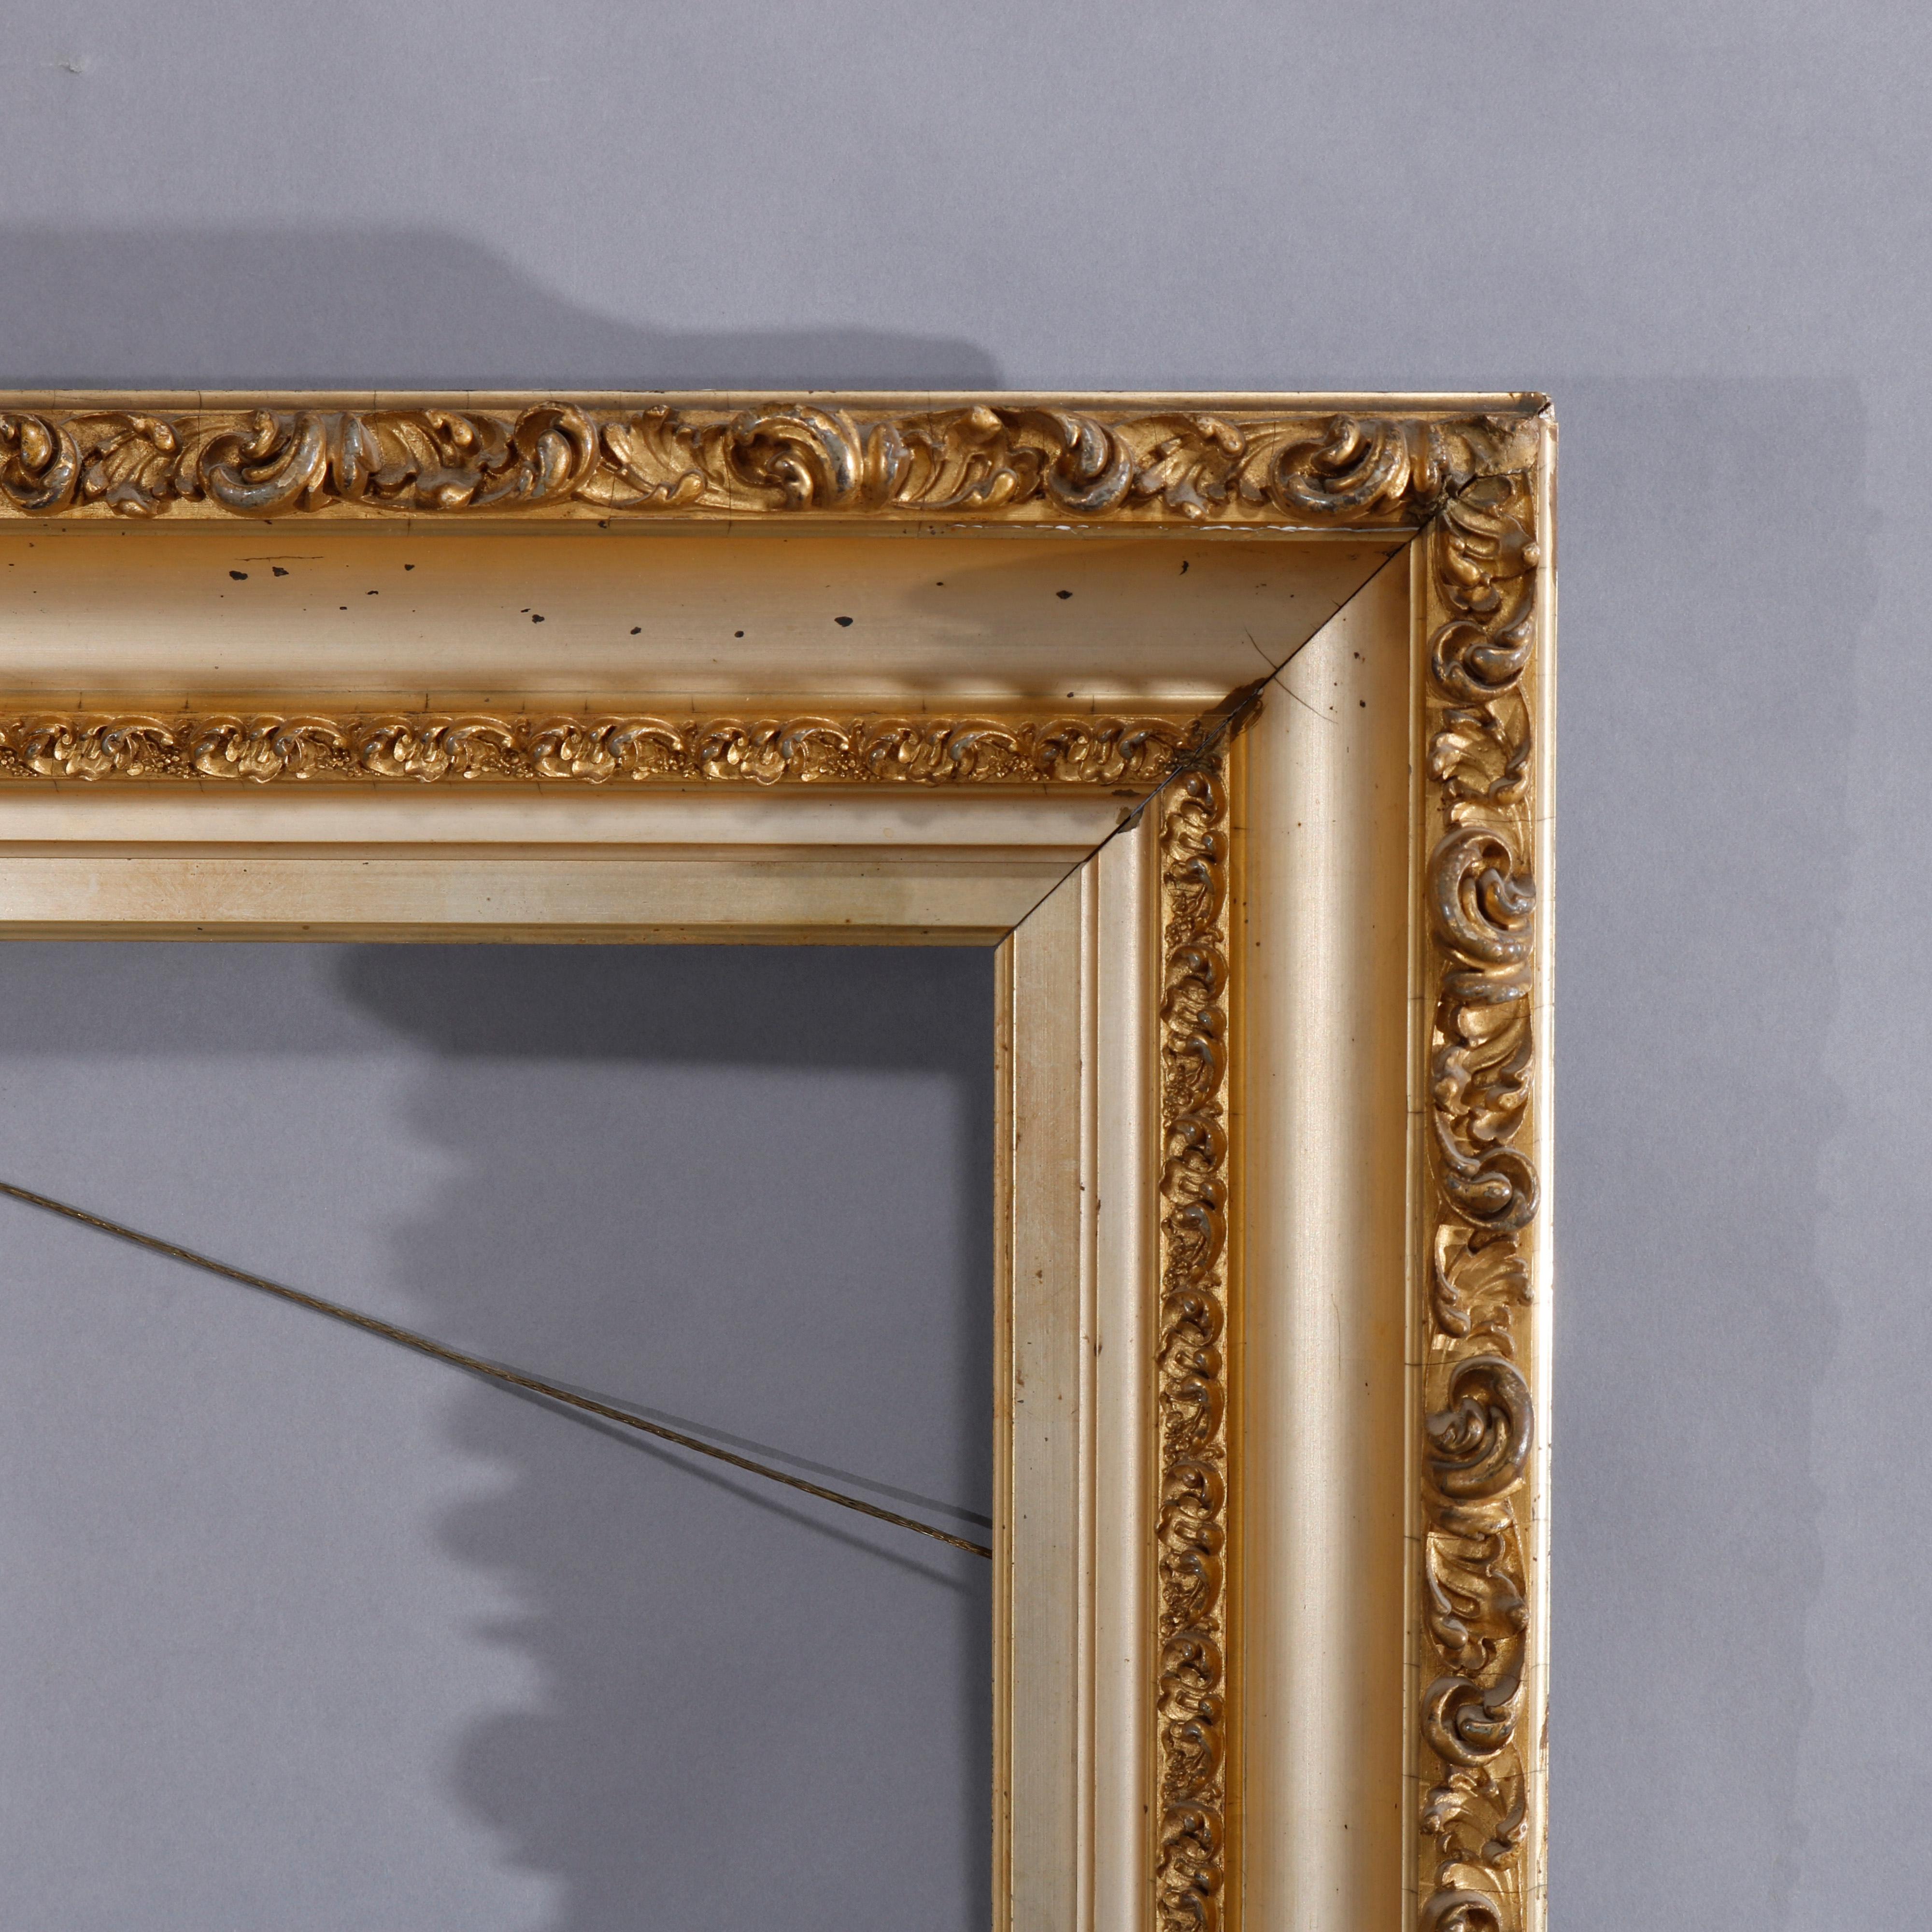 Carved Antique Victorian Scroll and Foliate Giltwood Art Frame, circa 1890